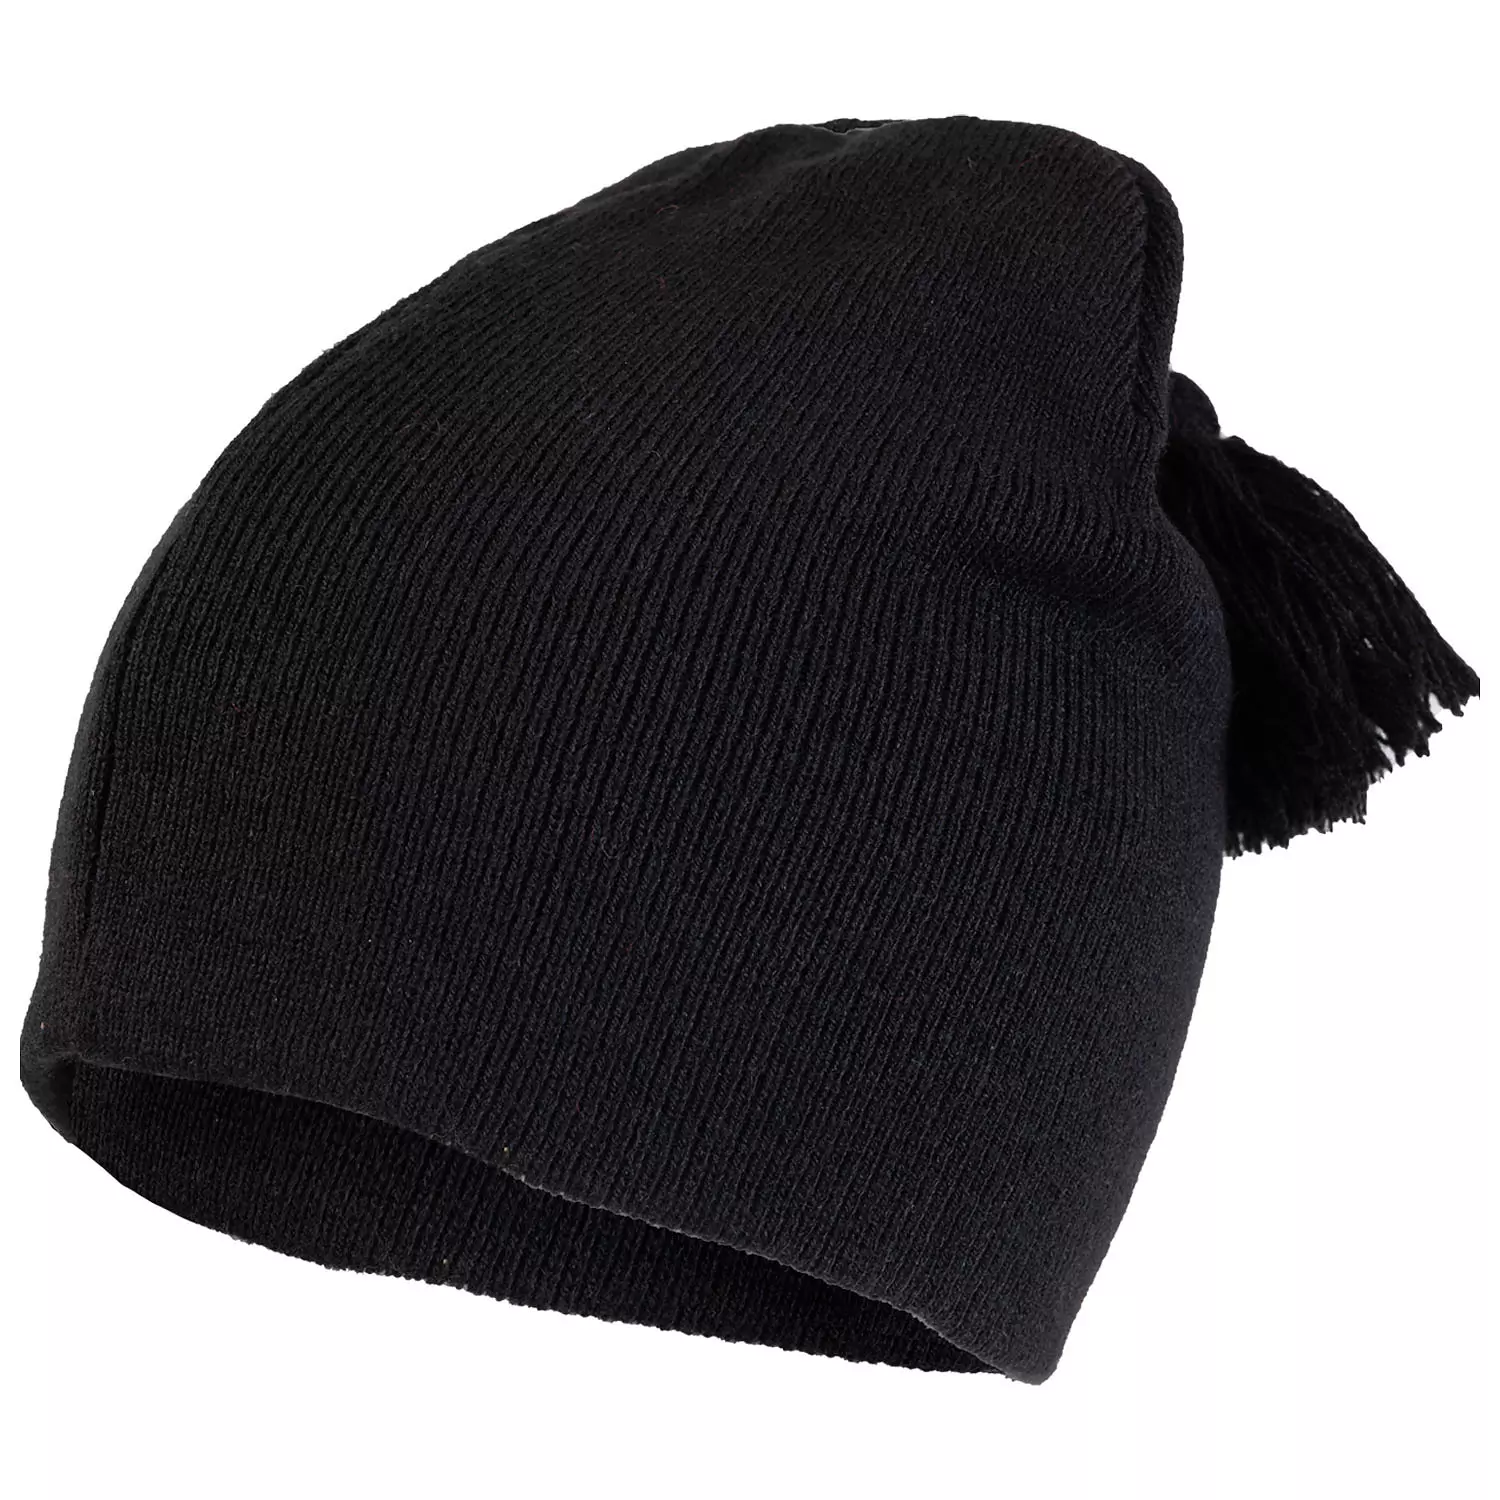 Knit toque with tassle on top, noir